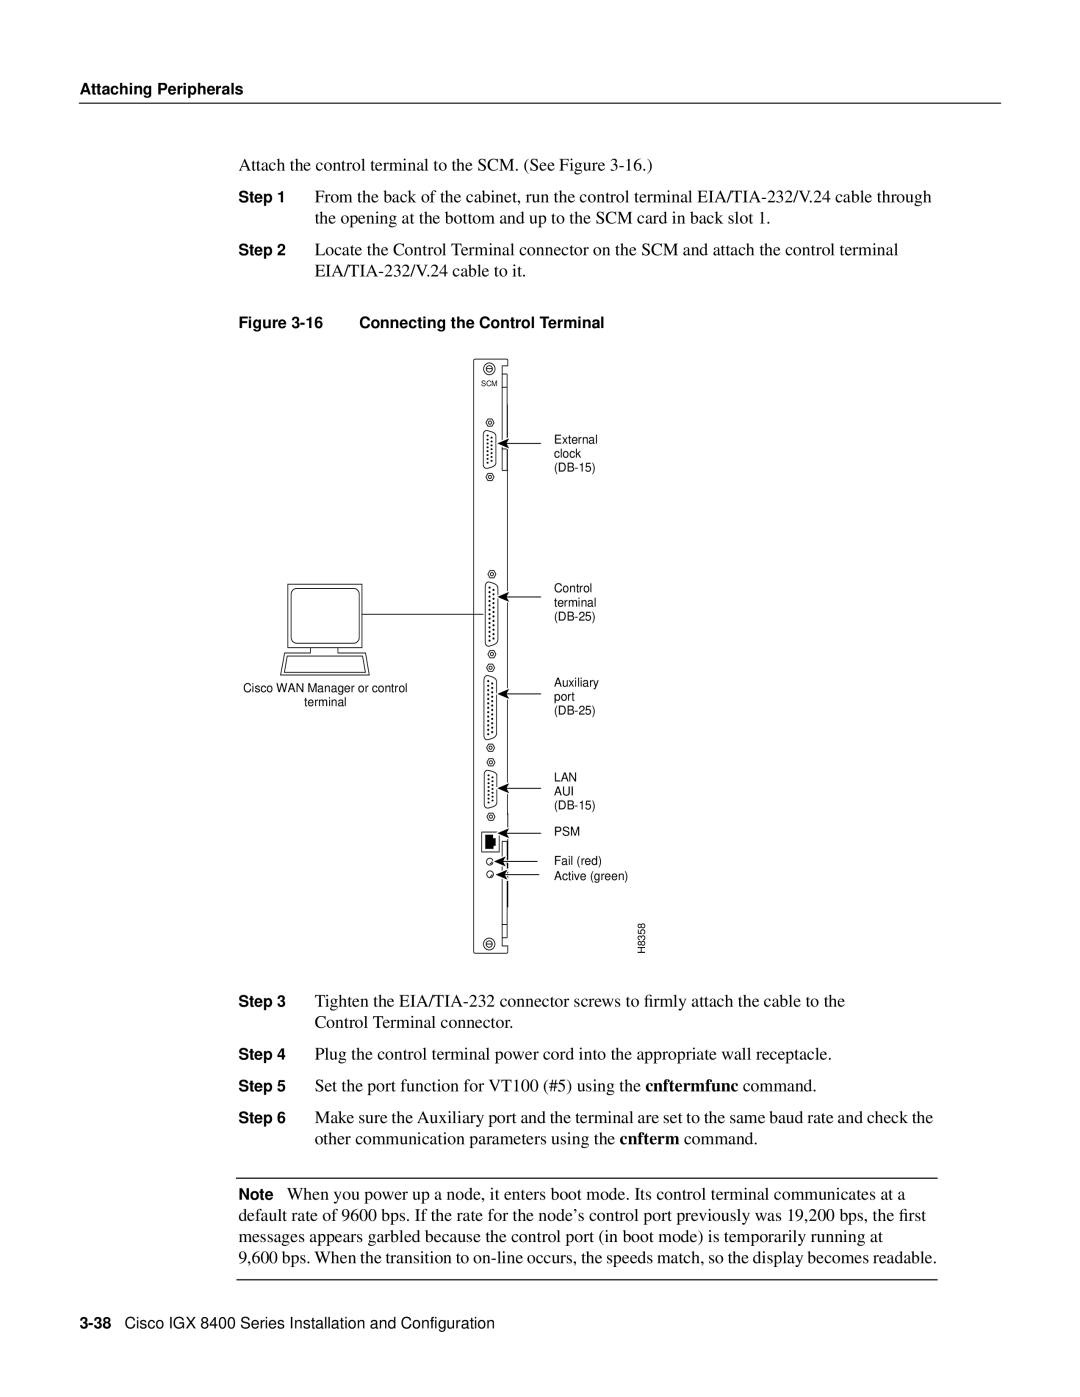 Cisco Systems IGX 8400 Series manual Attach the control terminal to the SCM. See Figure 